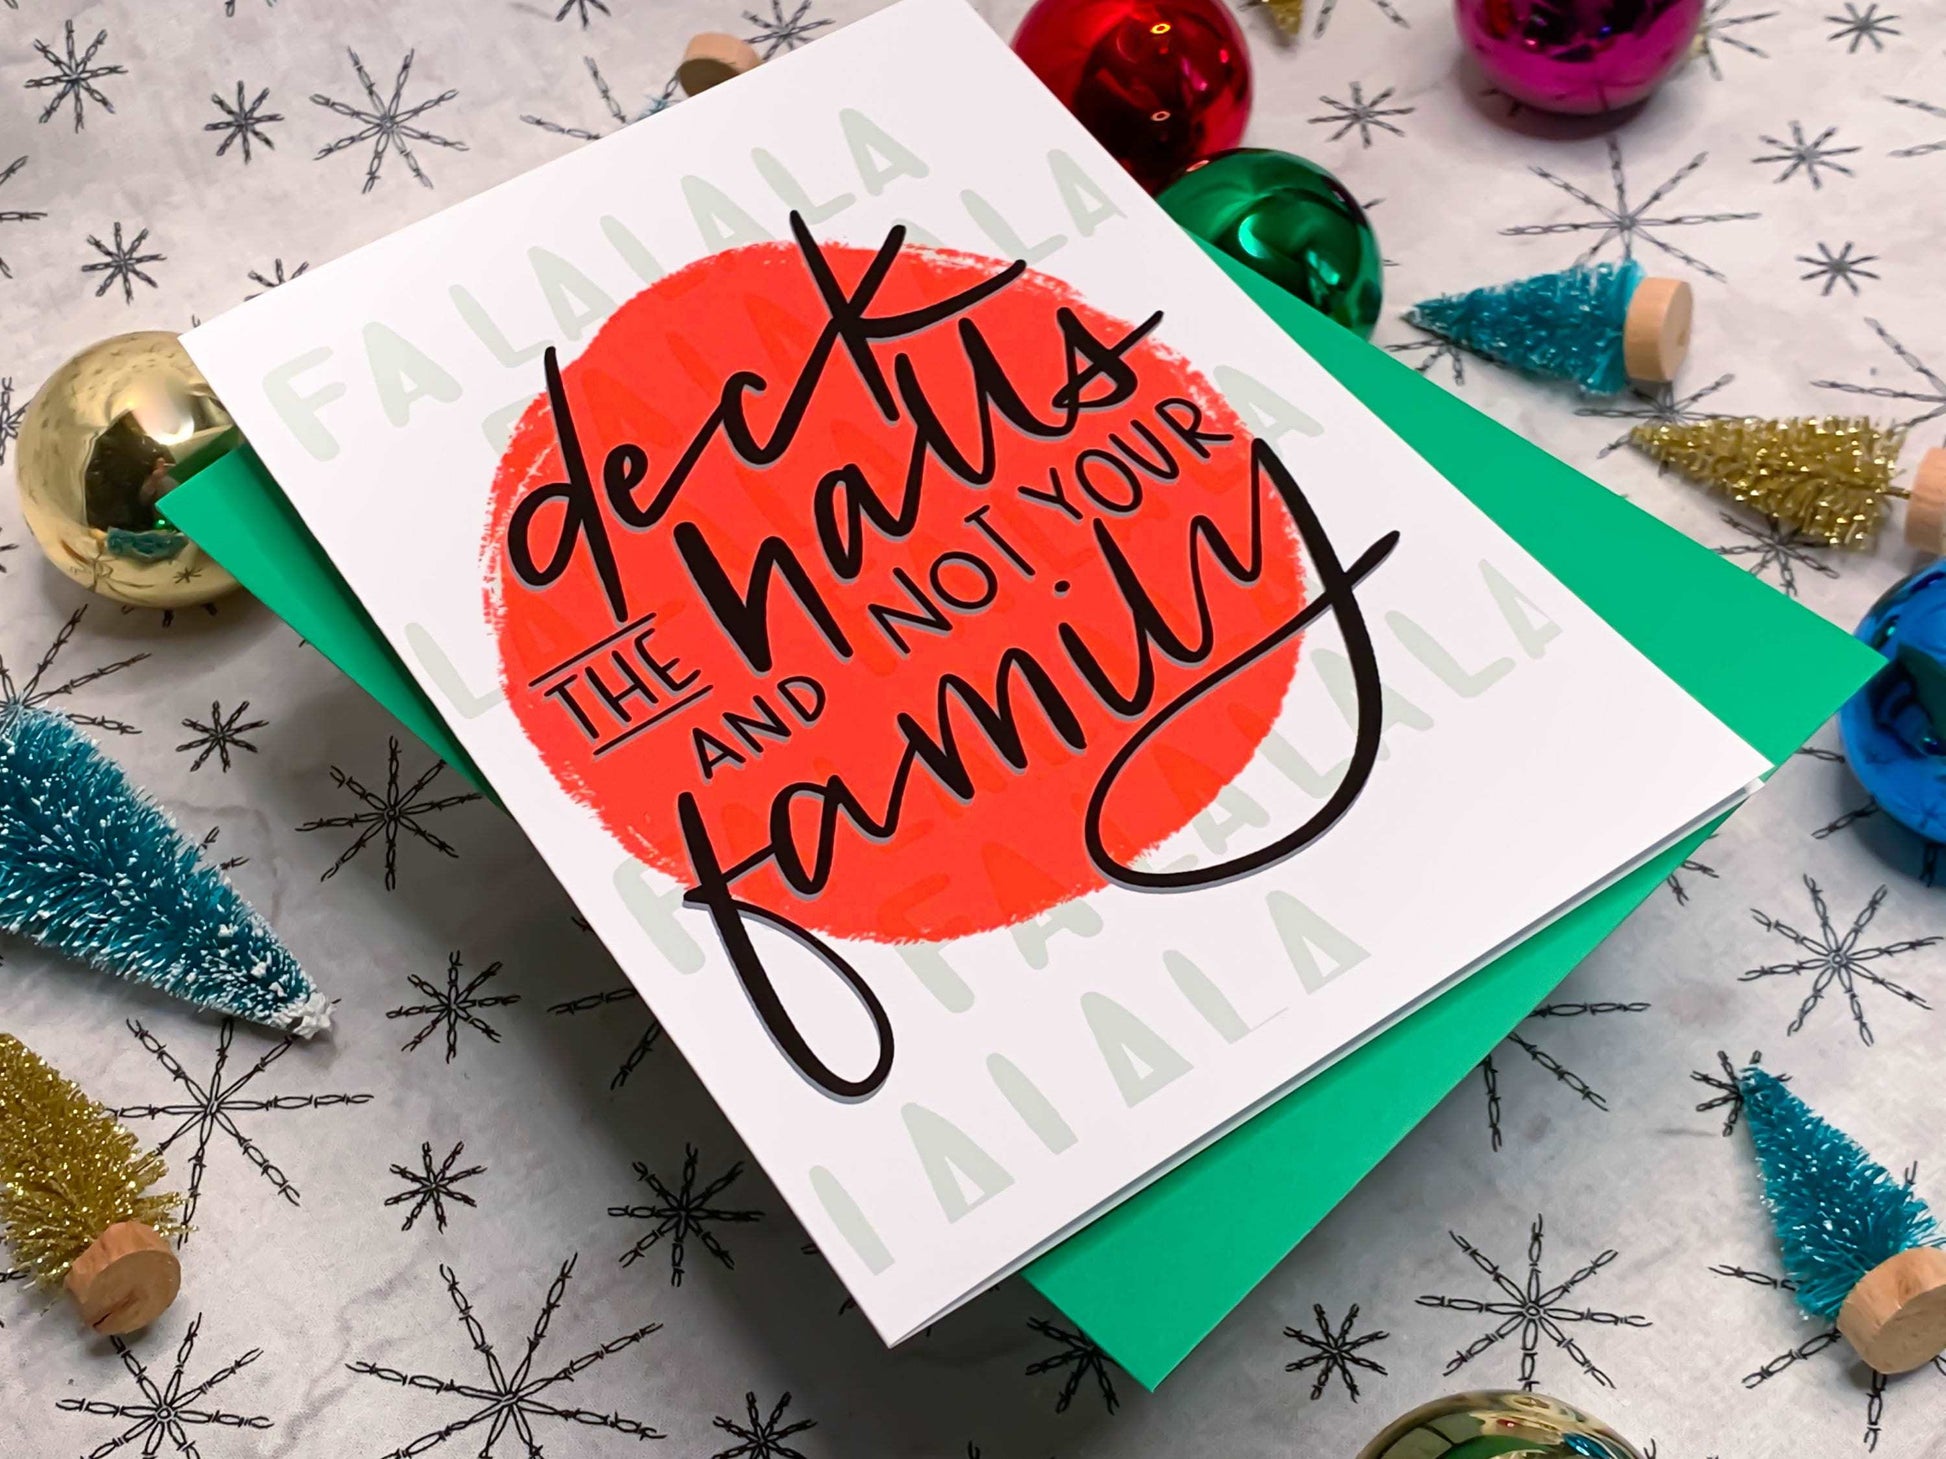 Deck the Halls and Not Your Family Funny Christmas Card by StoneDonut Design